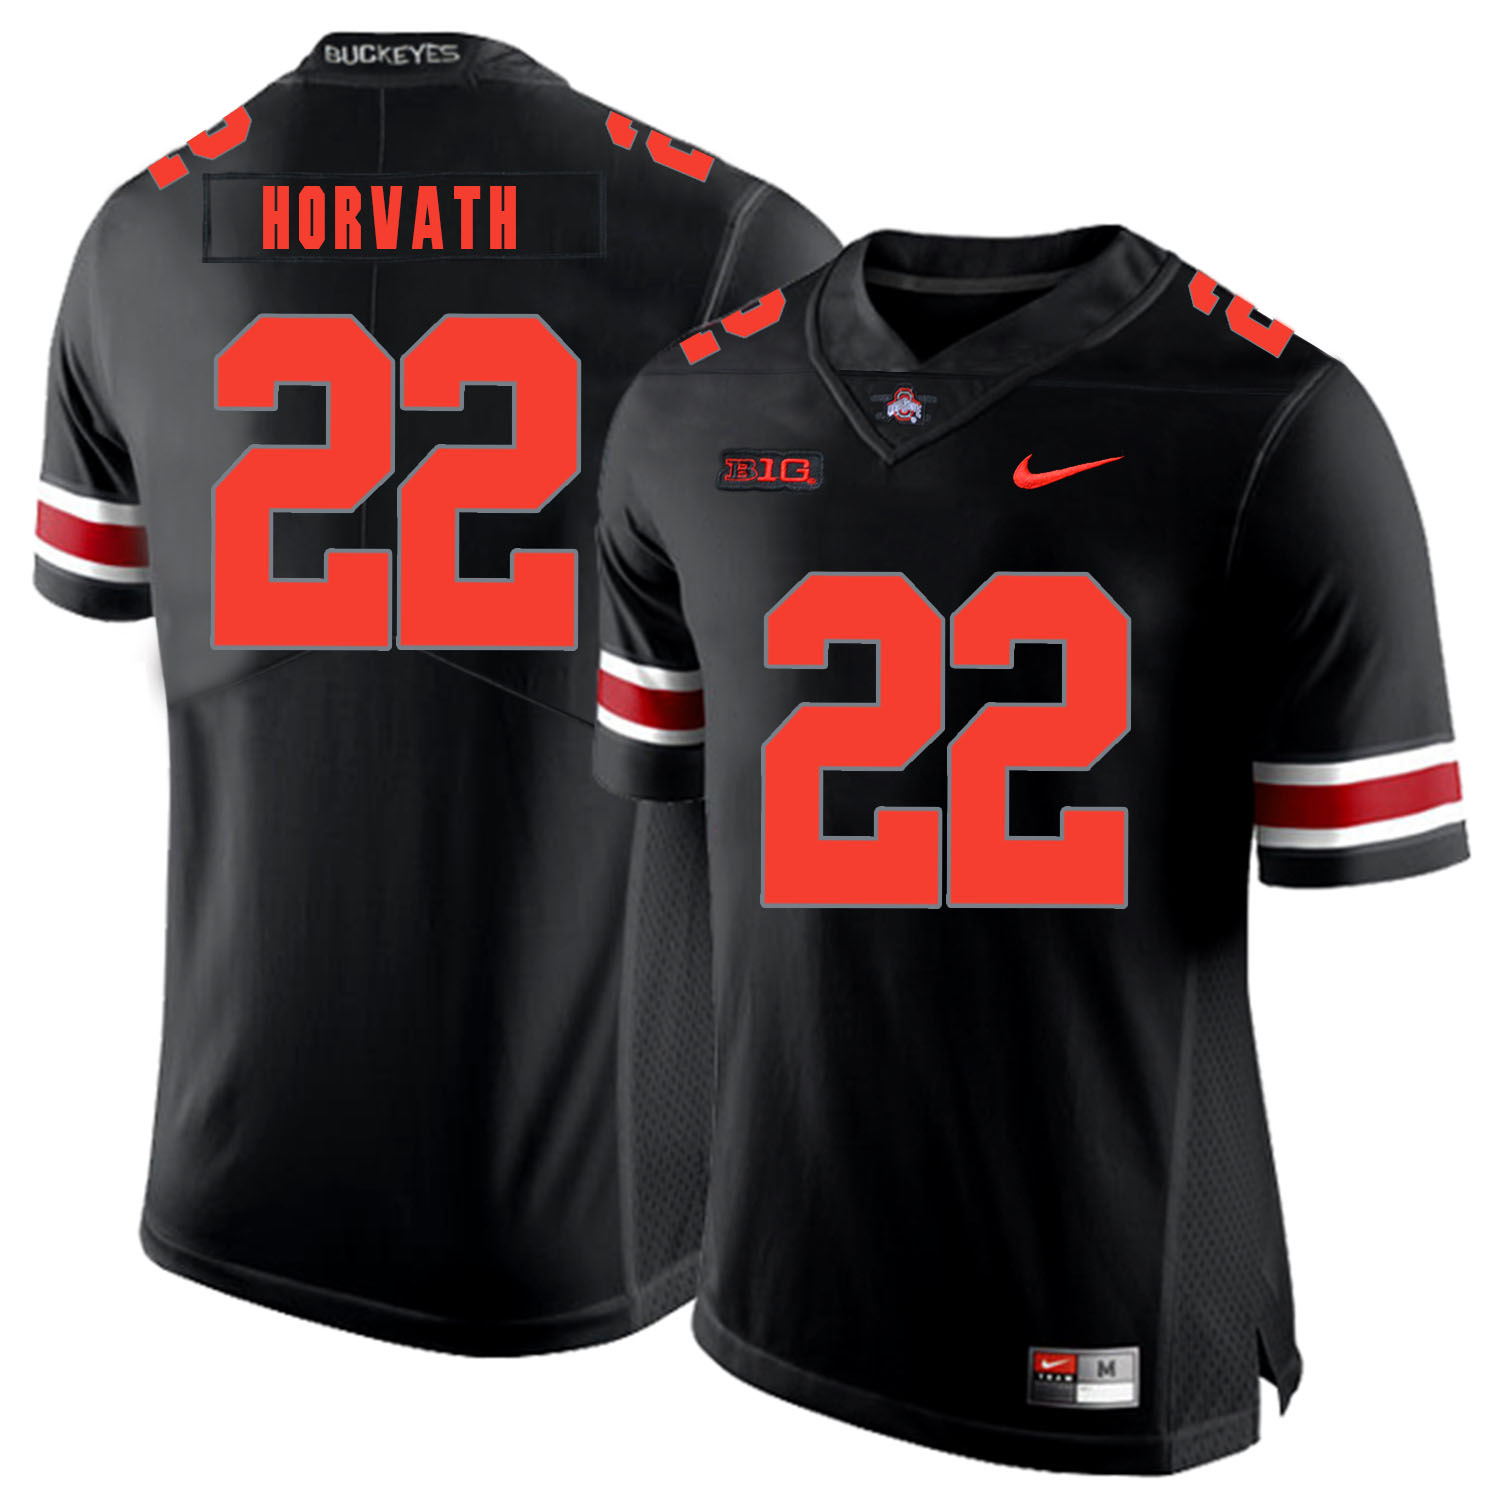 Ohio State Buckeyes 22 Les Horvath Black Shadow Nike College Football Jersey